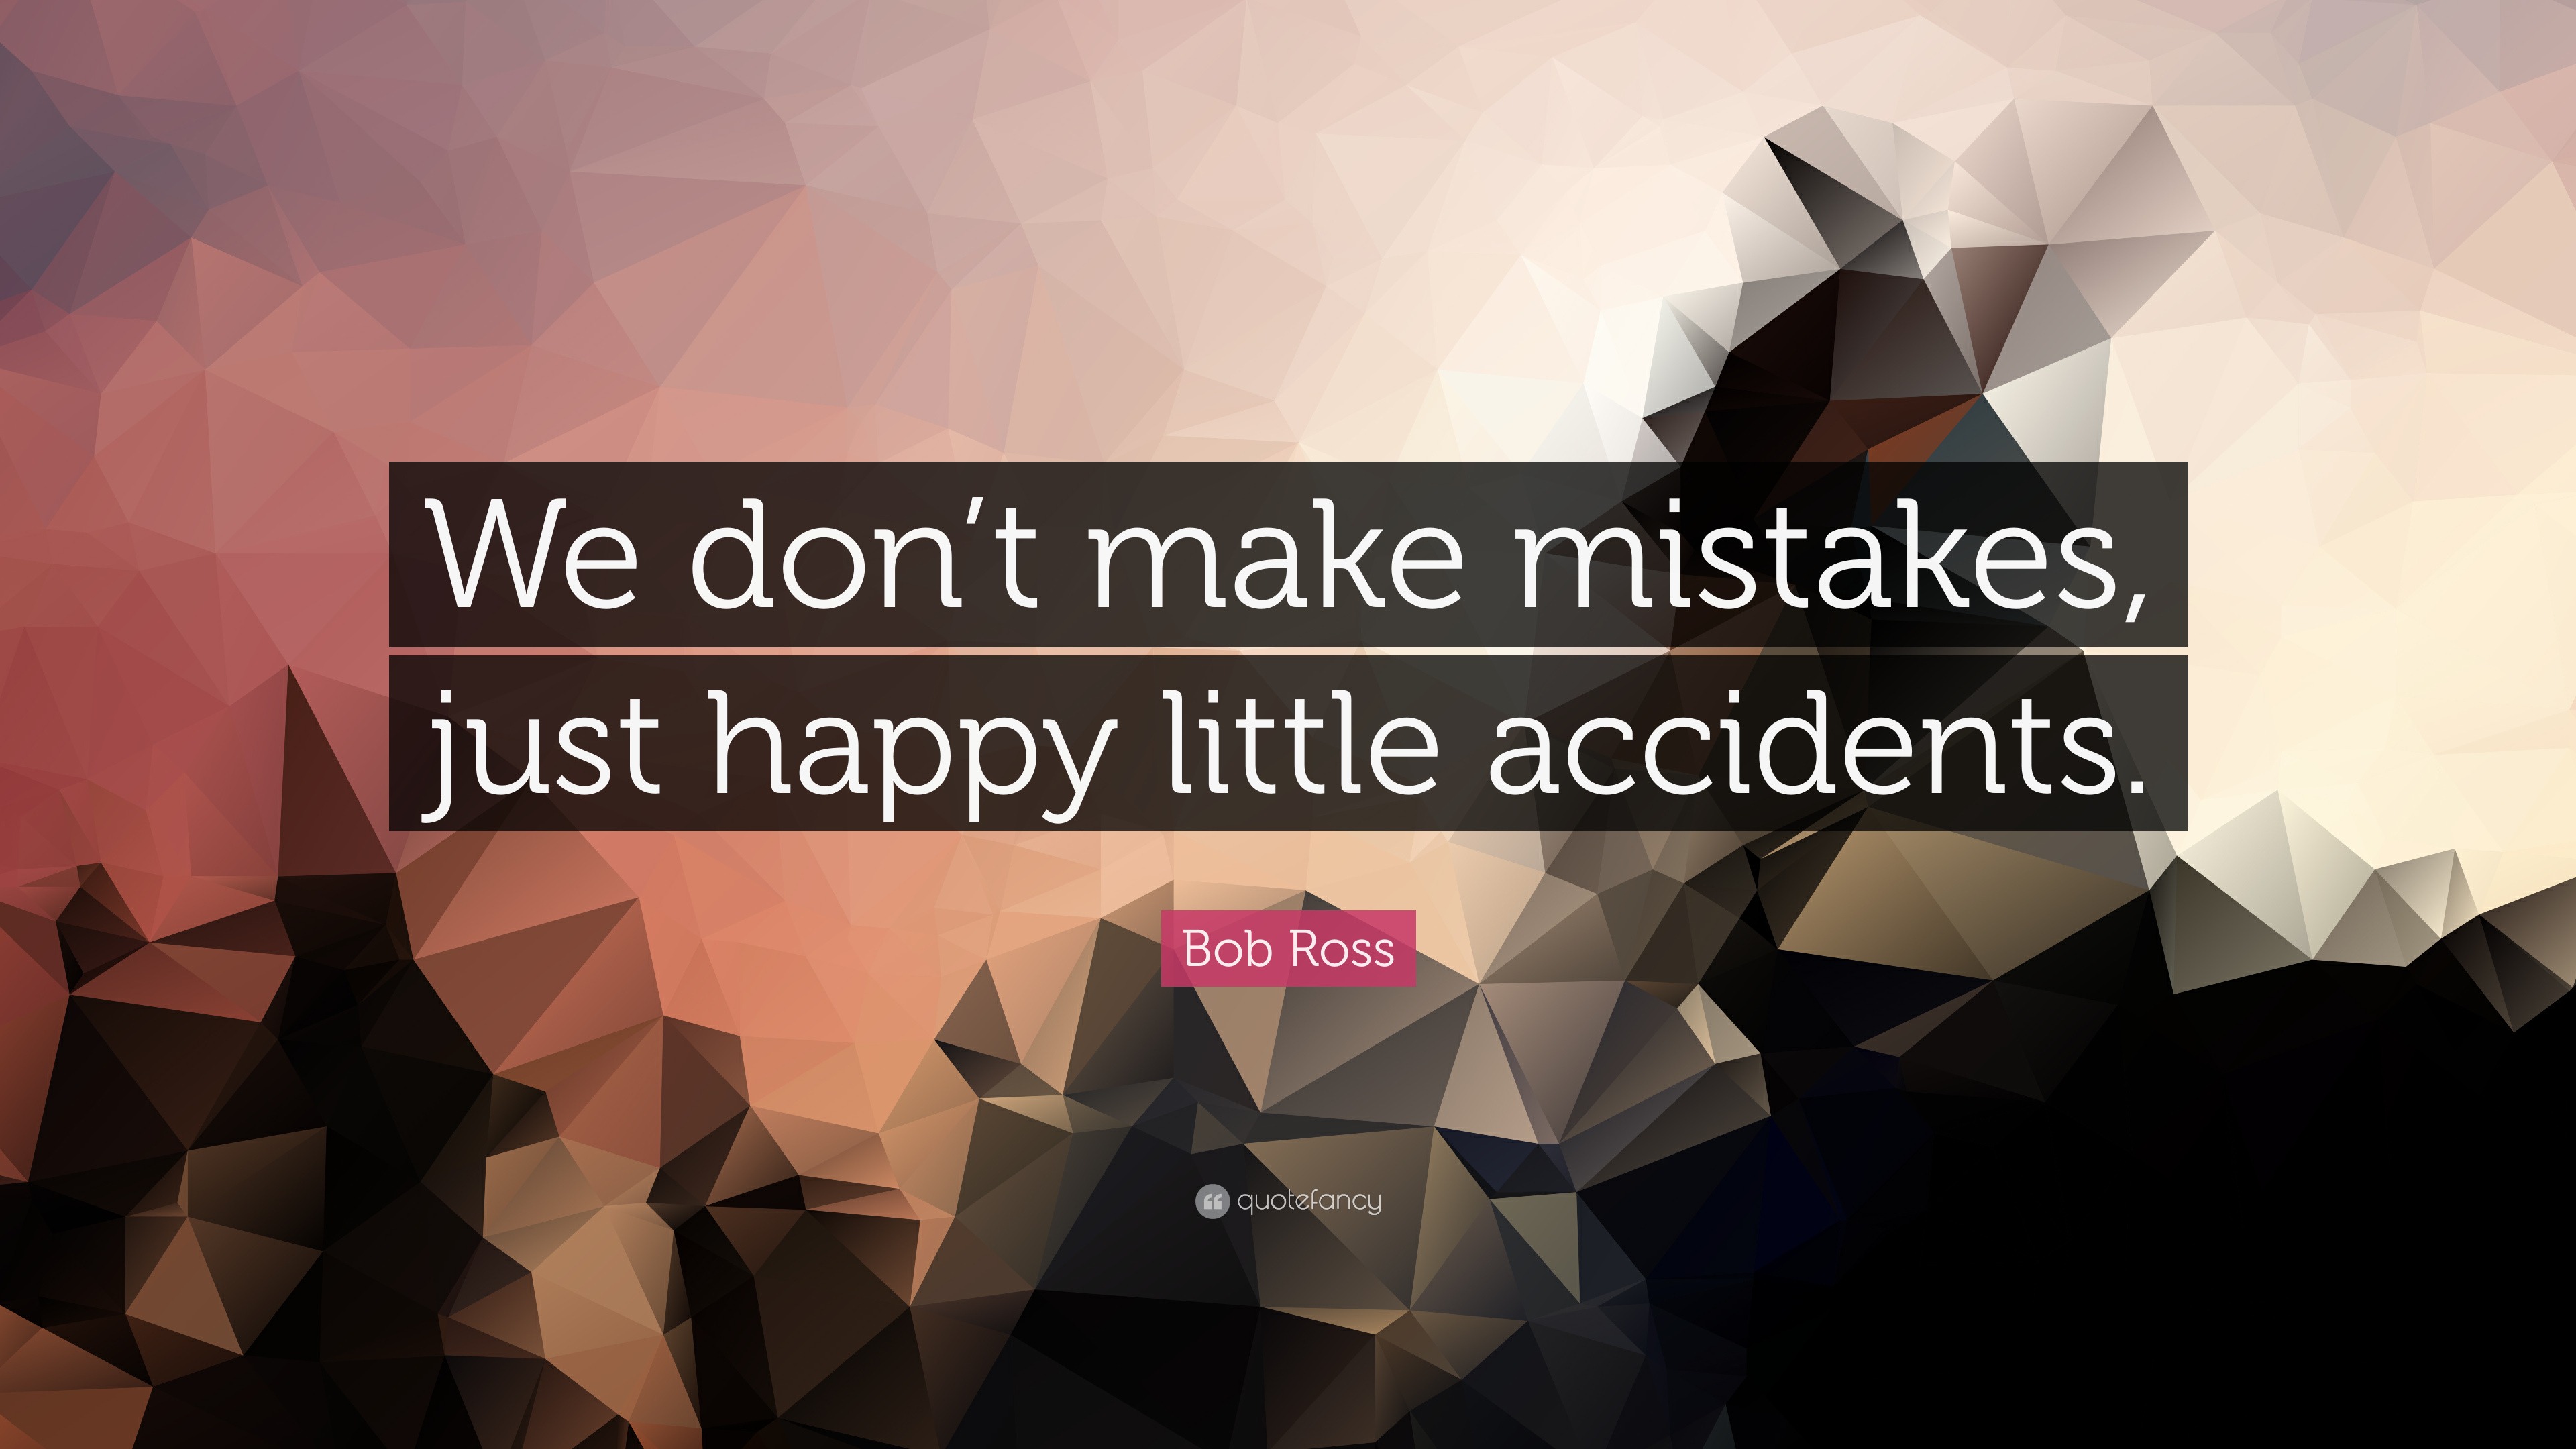 Bob Ross Quote: “We don’t make mistakes, just happy little accidents.”